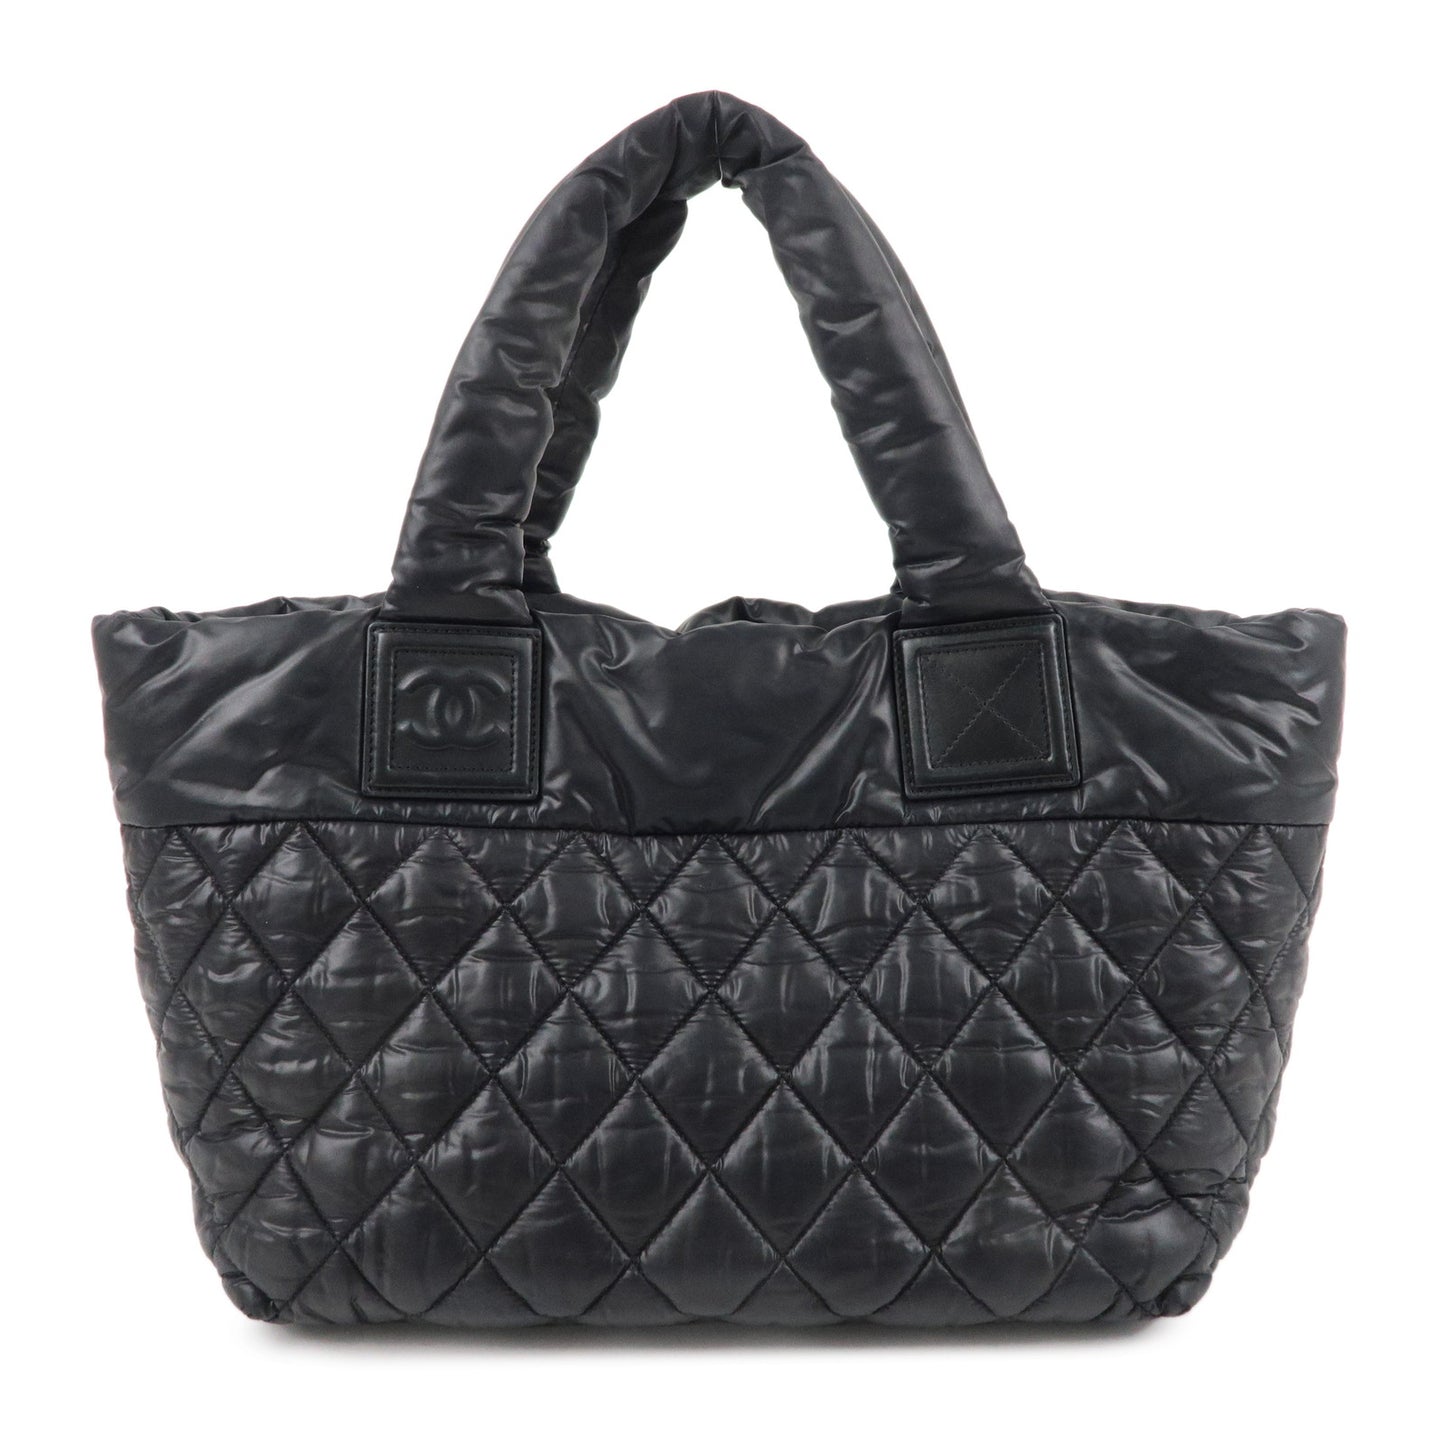 CHANEL Nylon Leather Coco Cocoon PM Tote Bag Hand Bag Black A48610